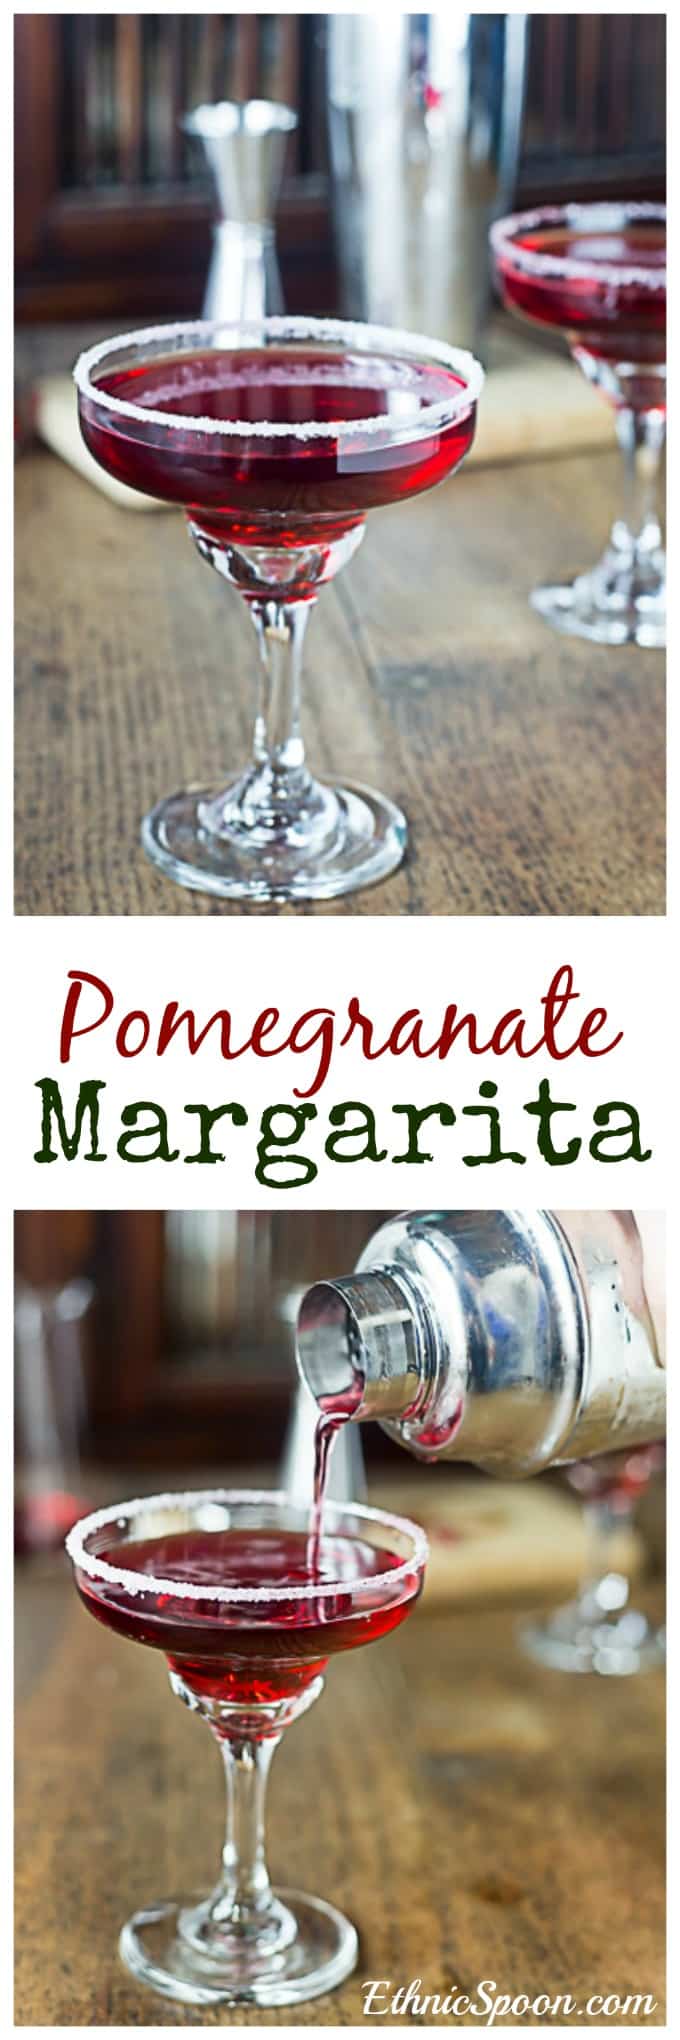 Shake up a pomegranate margarita! Sweet, tangy, light and refreshing pomegranate margarita with a sugar rimmed glass adds a nice contrast of flavors. | ethnicspoon.com